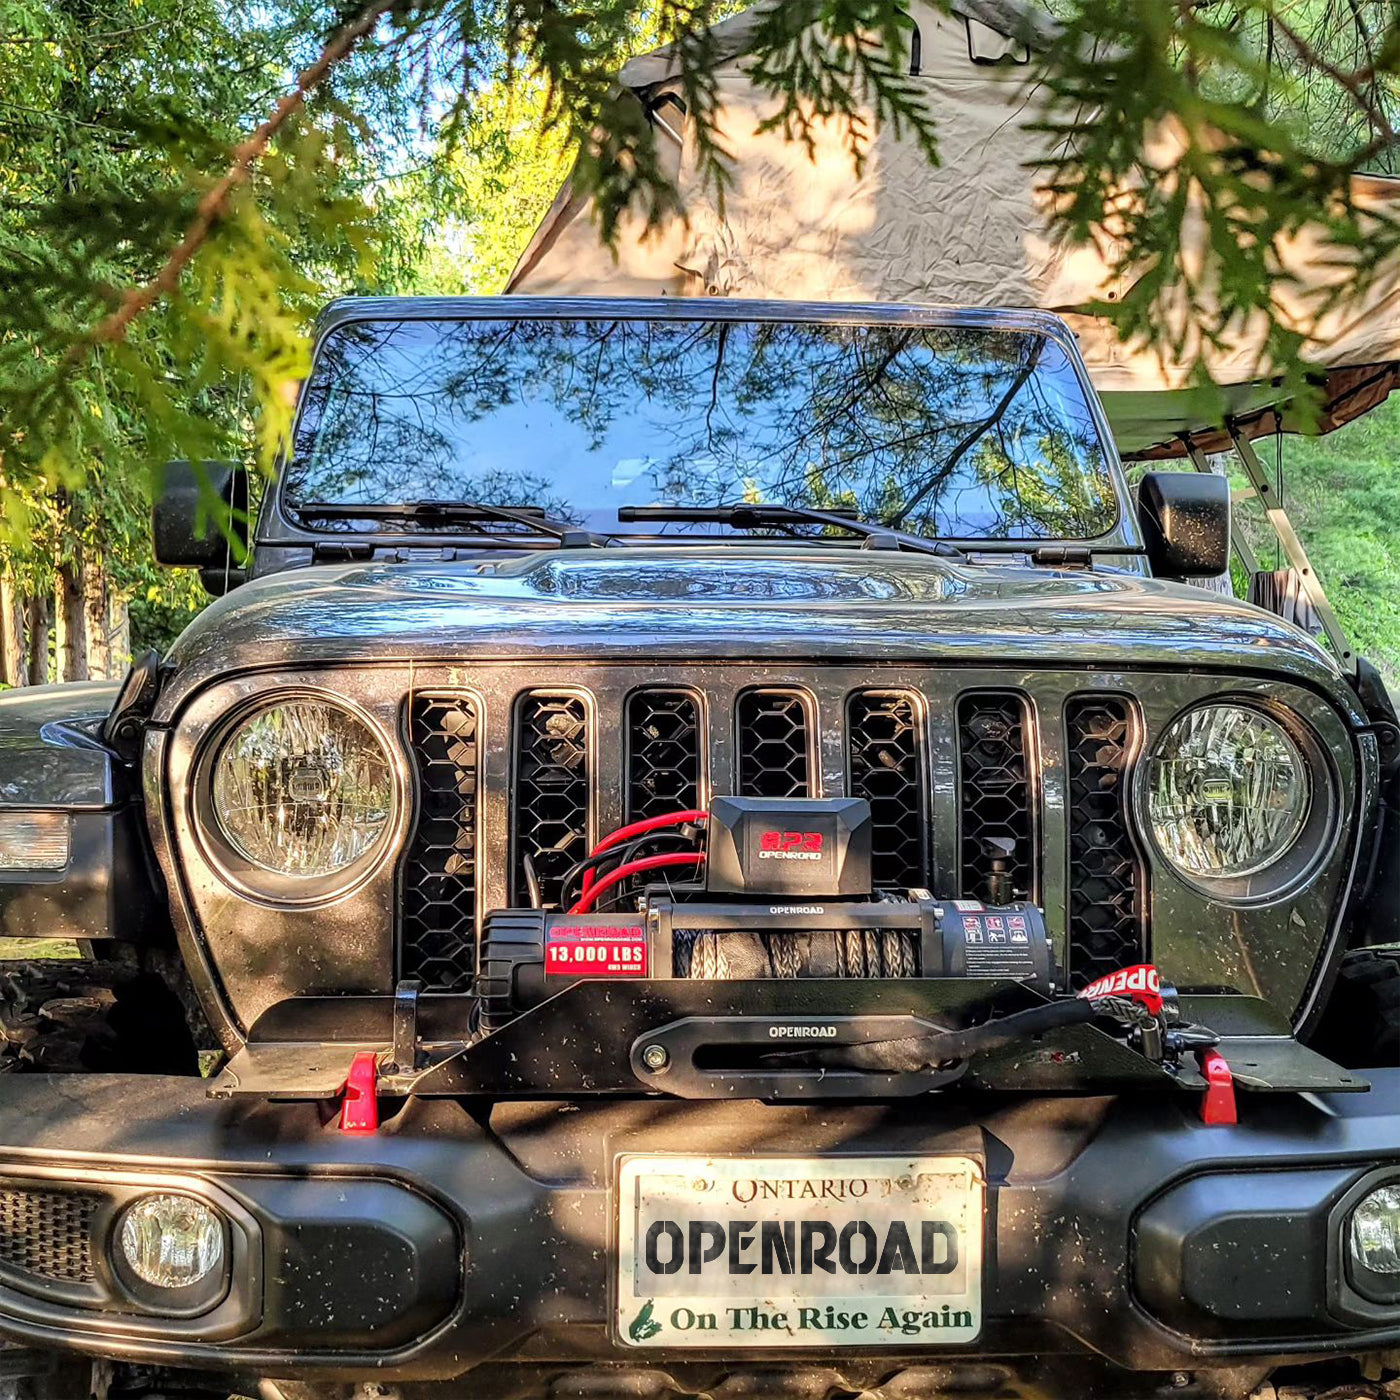 OPENROAD 13,000 lbs winch with synthetic rope and 2 wireless remote controllers - Panther Series 2S  openroad4wd.com   